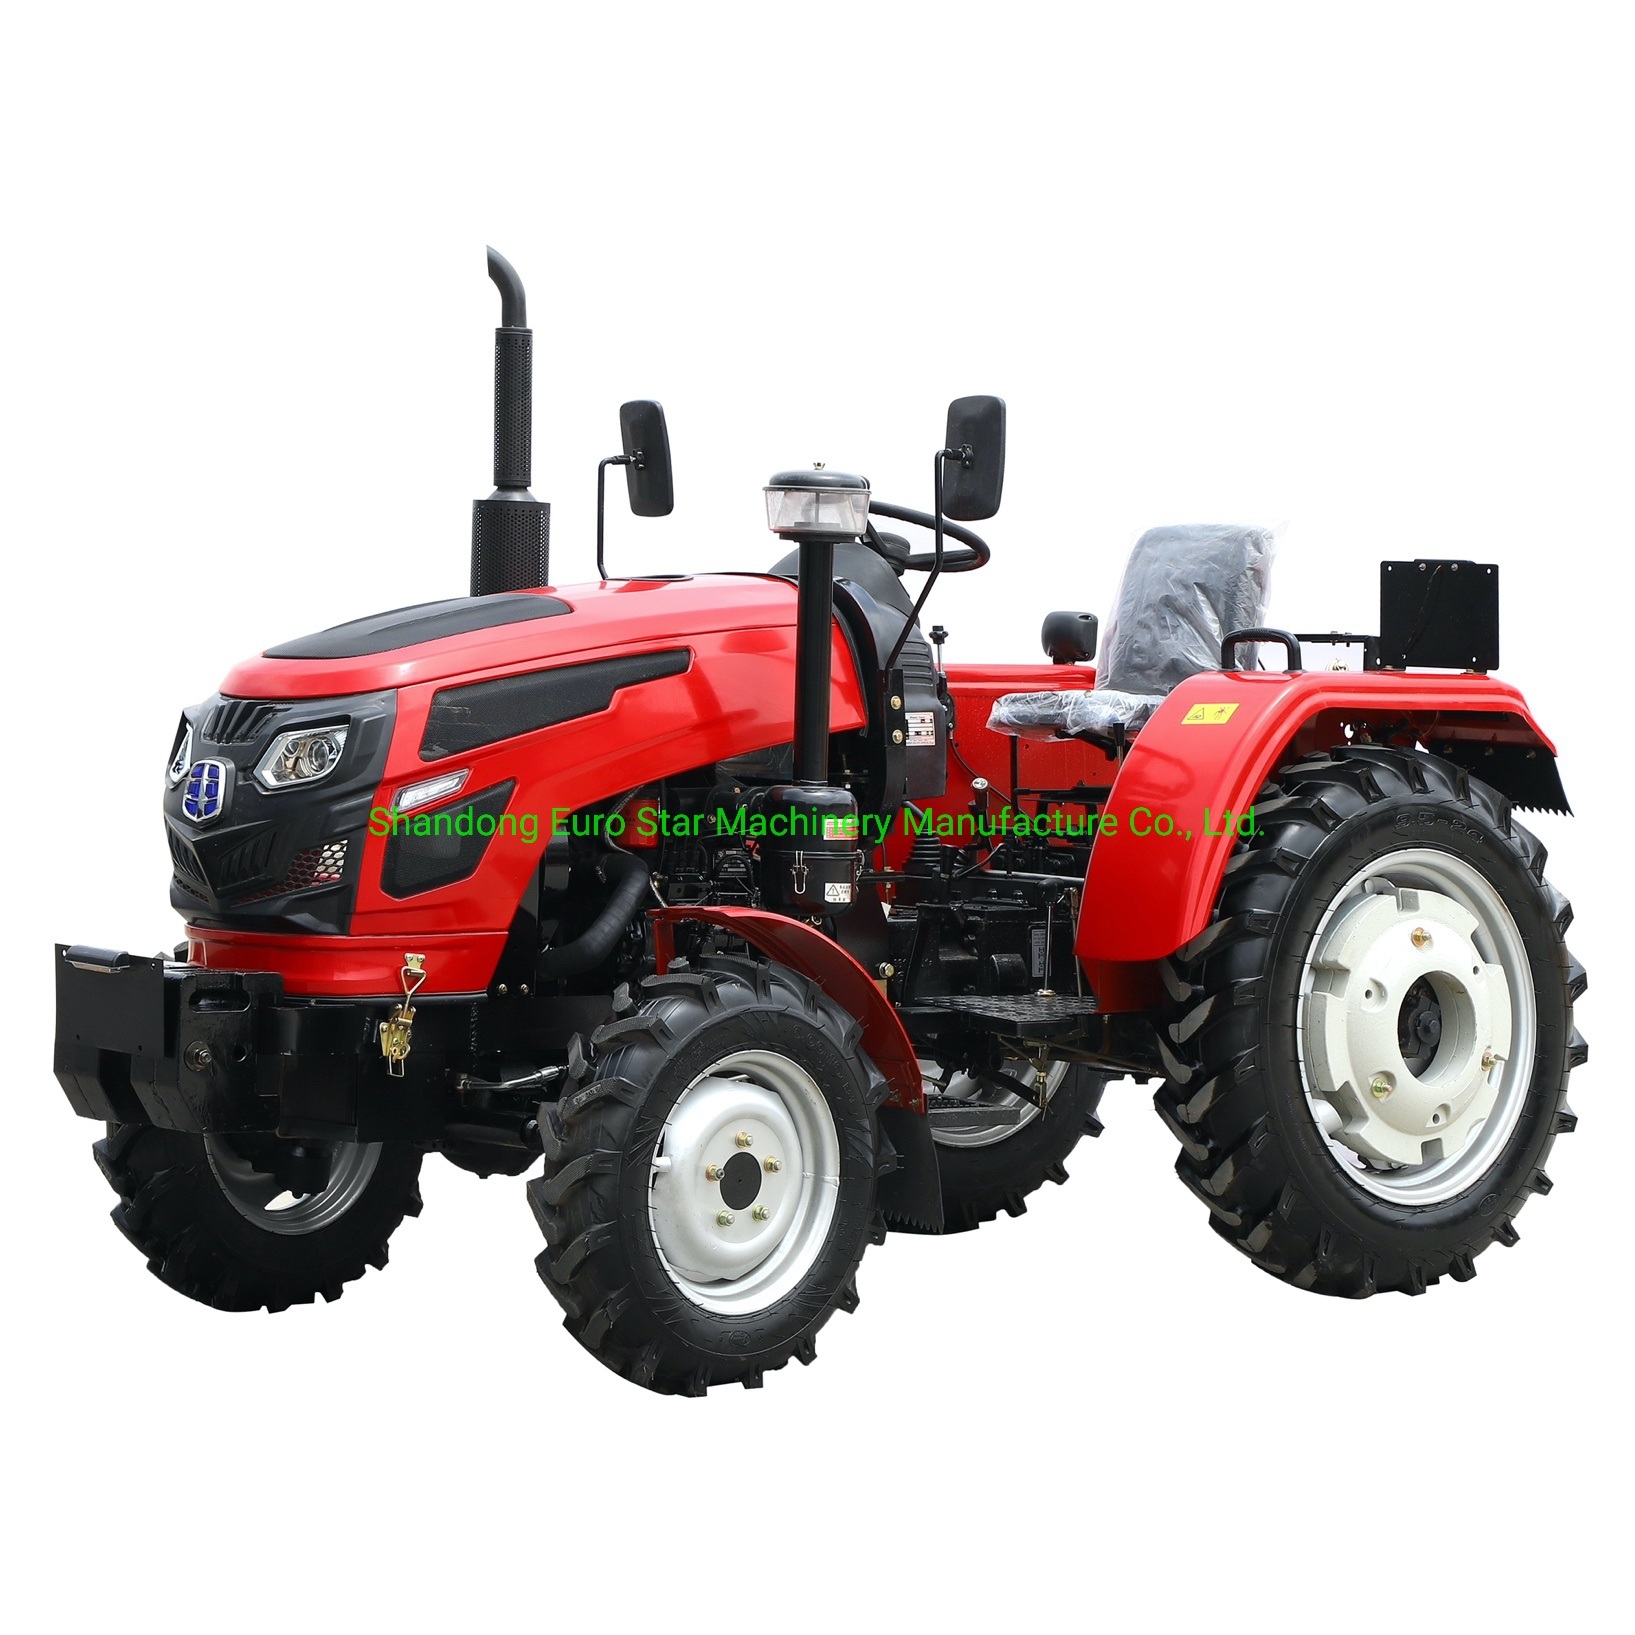 Y-4WD-25HP-Mini-Orchard-Tractor-Small-Four-Wheel-Farm-Crawler-Paddy-Lawn-Big-Garden-Walking-Diesel-China-Tractor-for-Agricultural-Machinery-Machine-Es2548y-CE.jpg